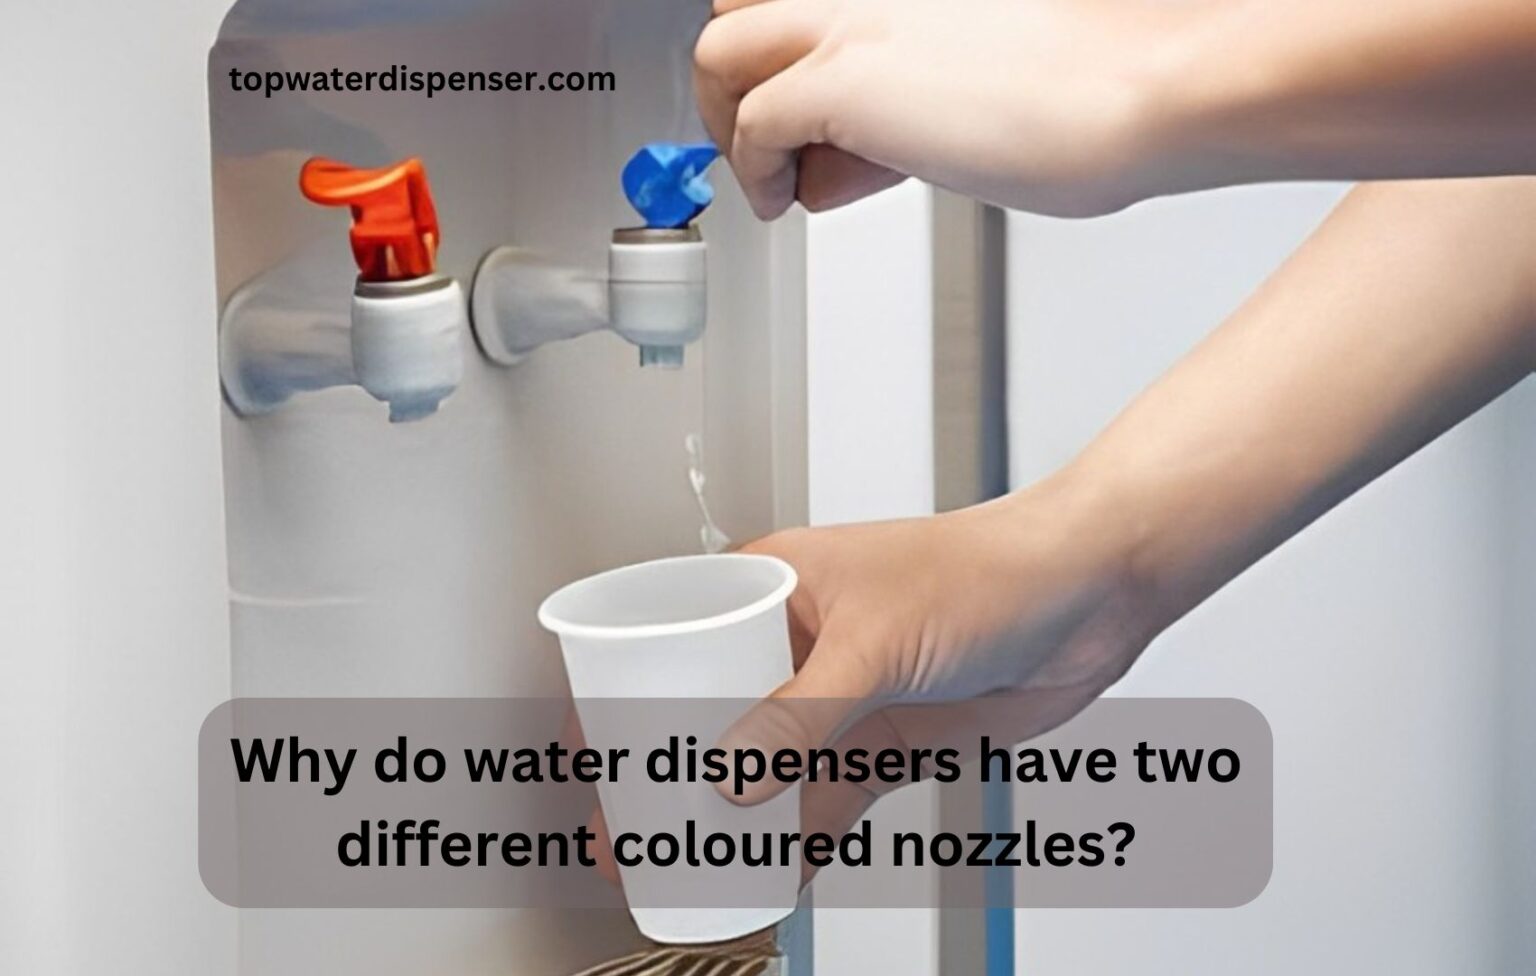 Why do water dispensers have two different coloured nozzles?